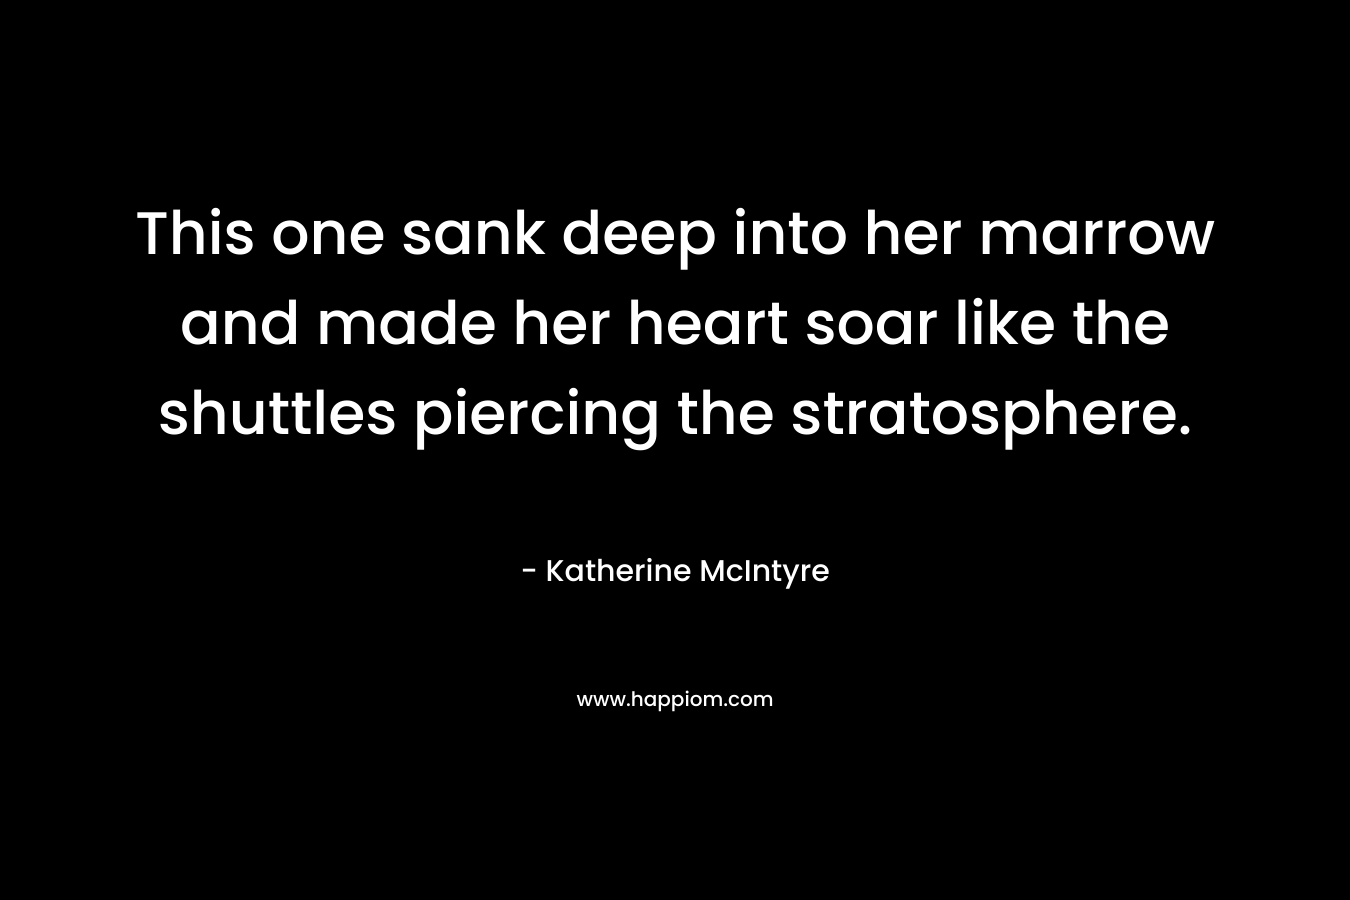 This one sank deep into her marrow and made her heart soar like the shuttles piercing the stratosphere. – Katherine McIntyre